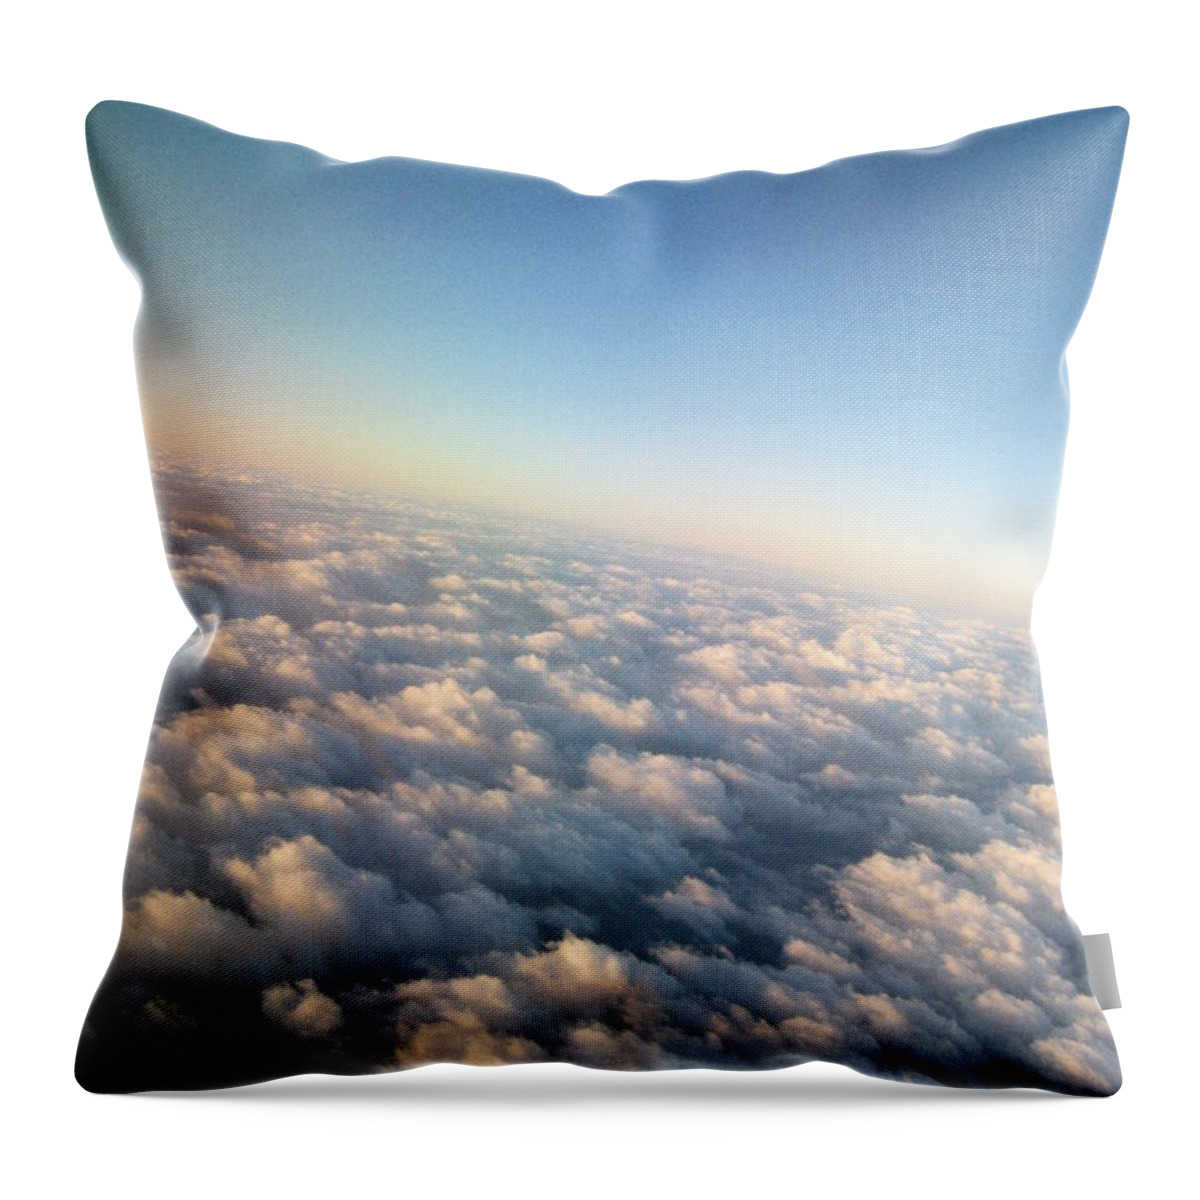 Sky Throw Pillow featuring the photograph Newborn Nebulas In Bloom by Lidia Trifonova